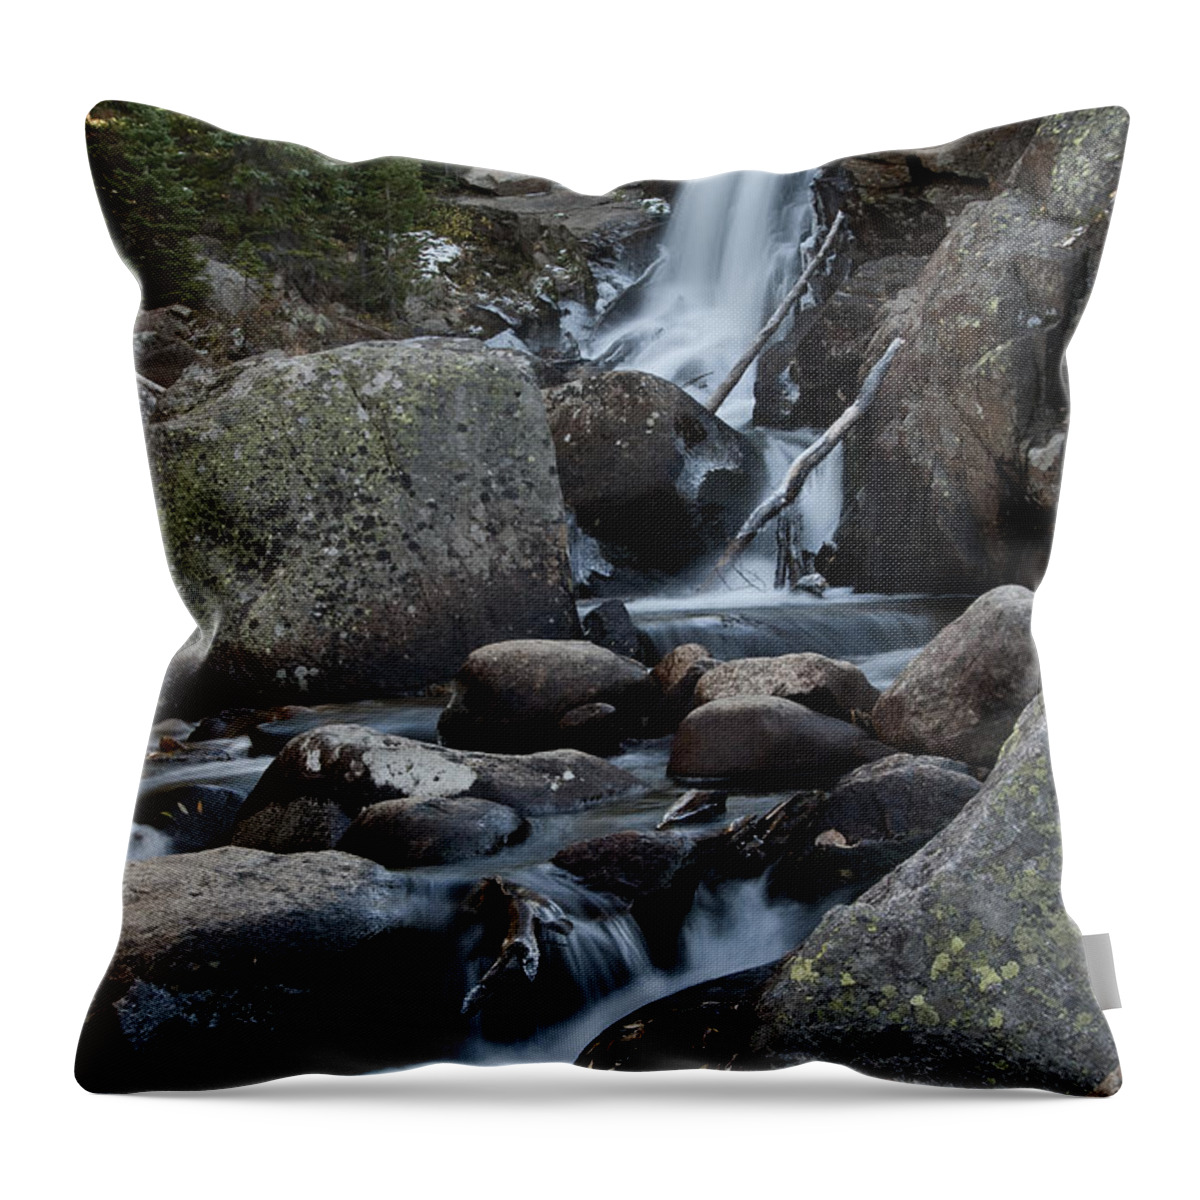 Photography Throw Pillow featuring the photograph Alberta Falls by Lee Kirchhevel